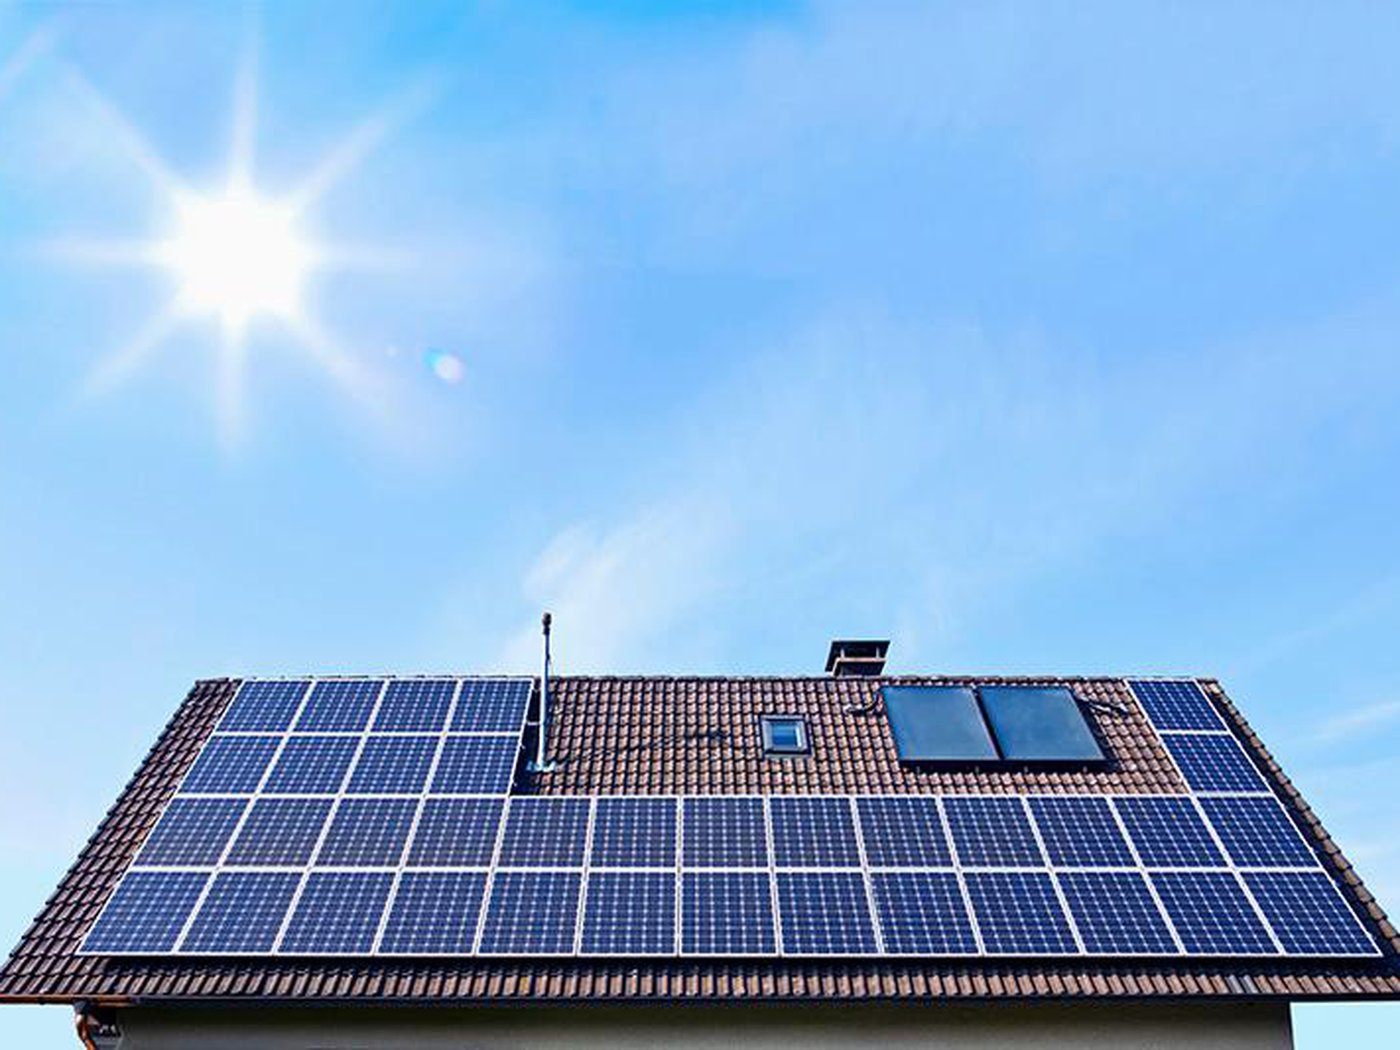 What Are The Top Benefits Of Going Solar?